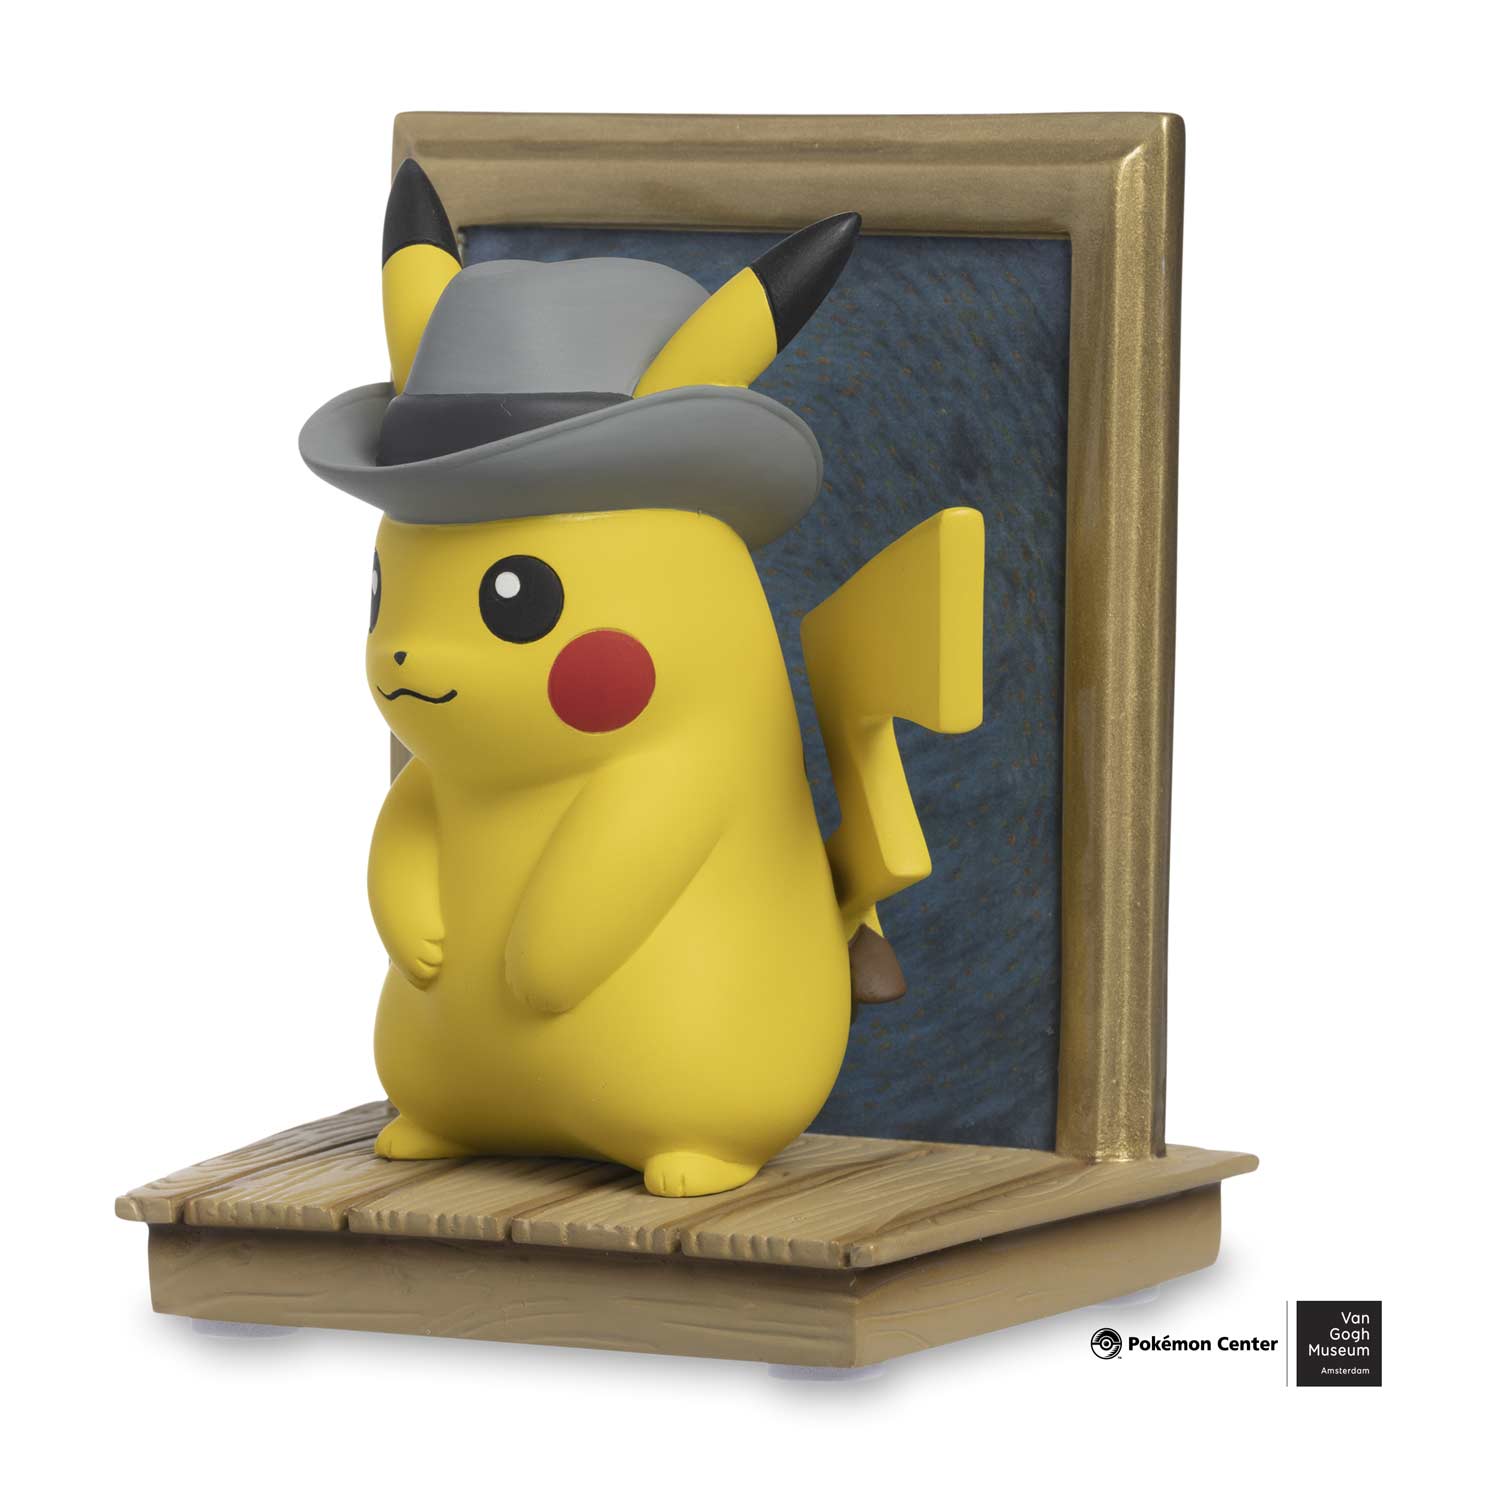 Pokemon Announces That More Van Gogh Pikachu Promo Cards Are Coming -  Esports Illustrated